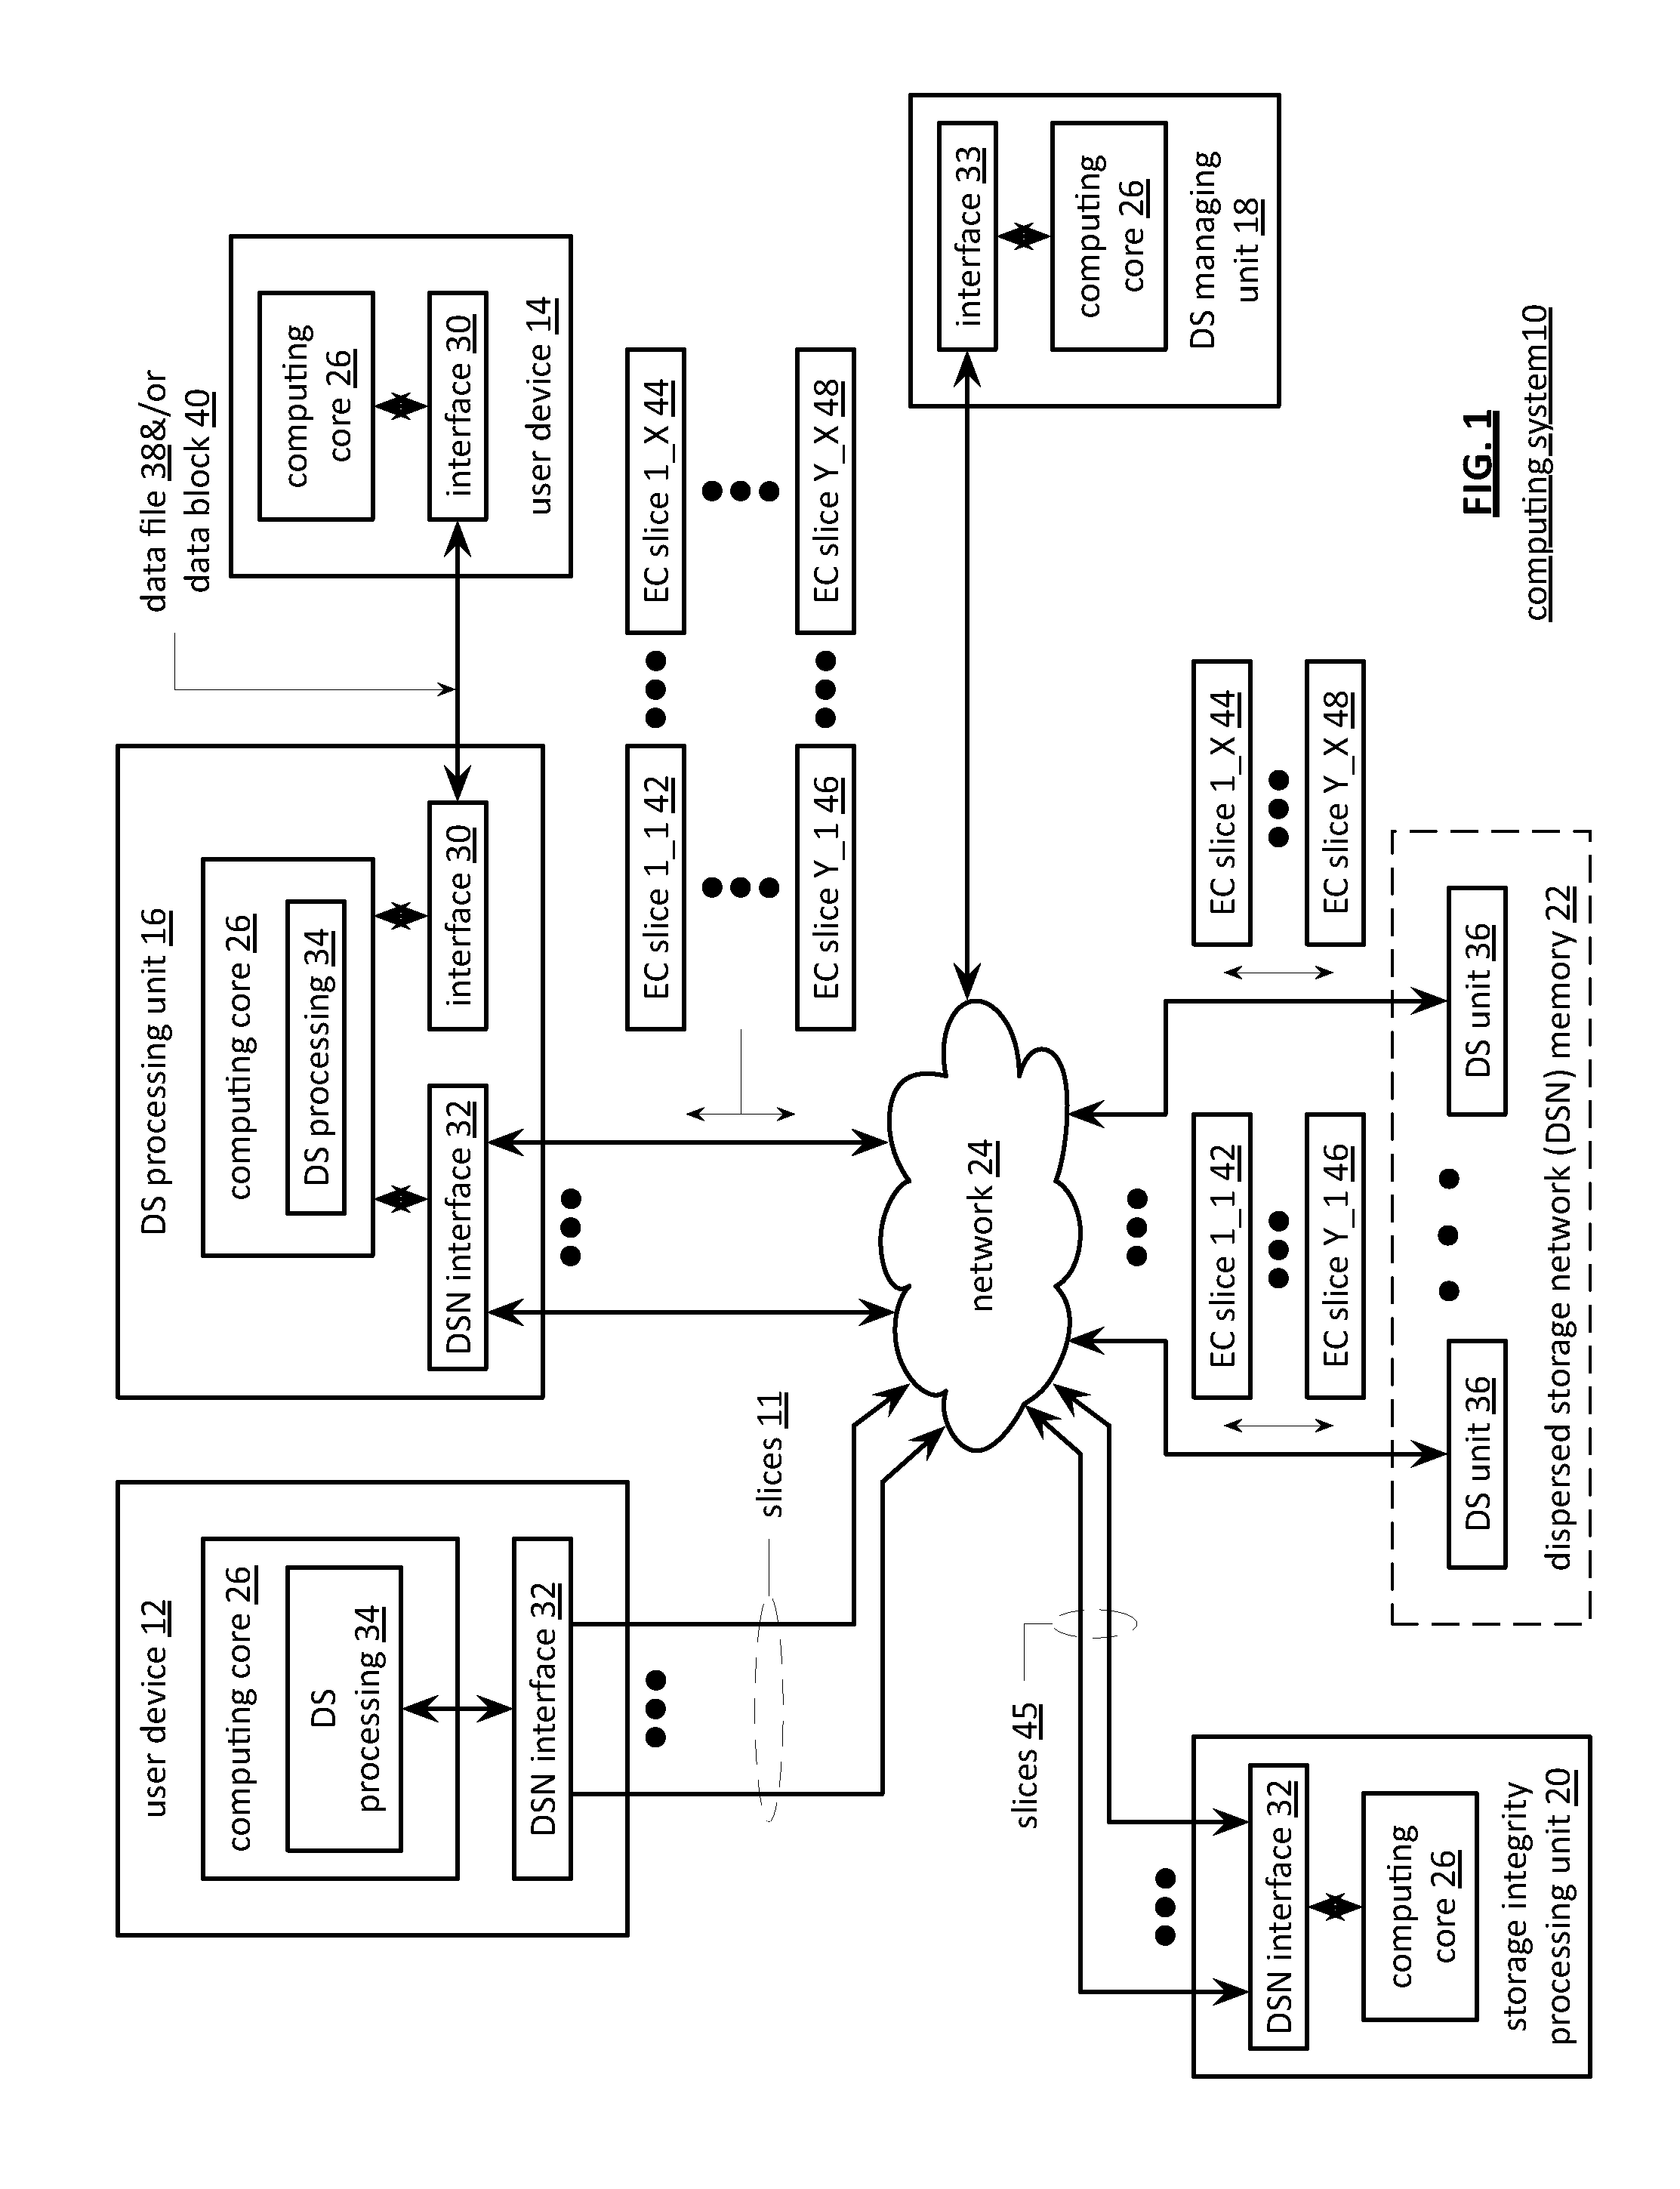 Distributedly storing raid data in a raid memory and a dispersed storage network memory